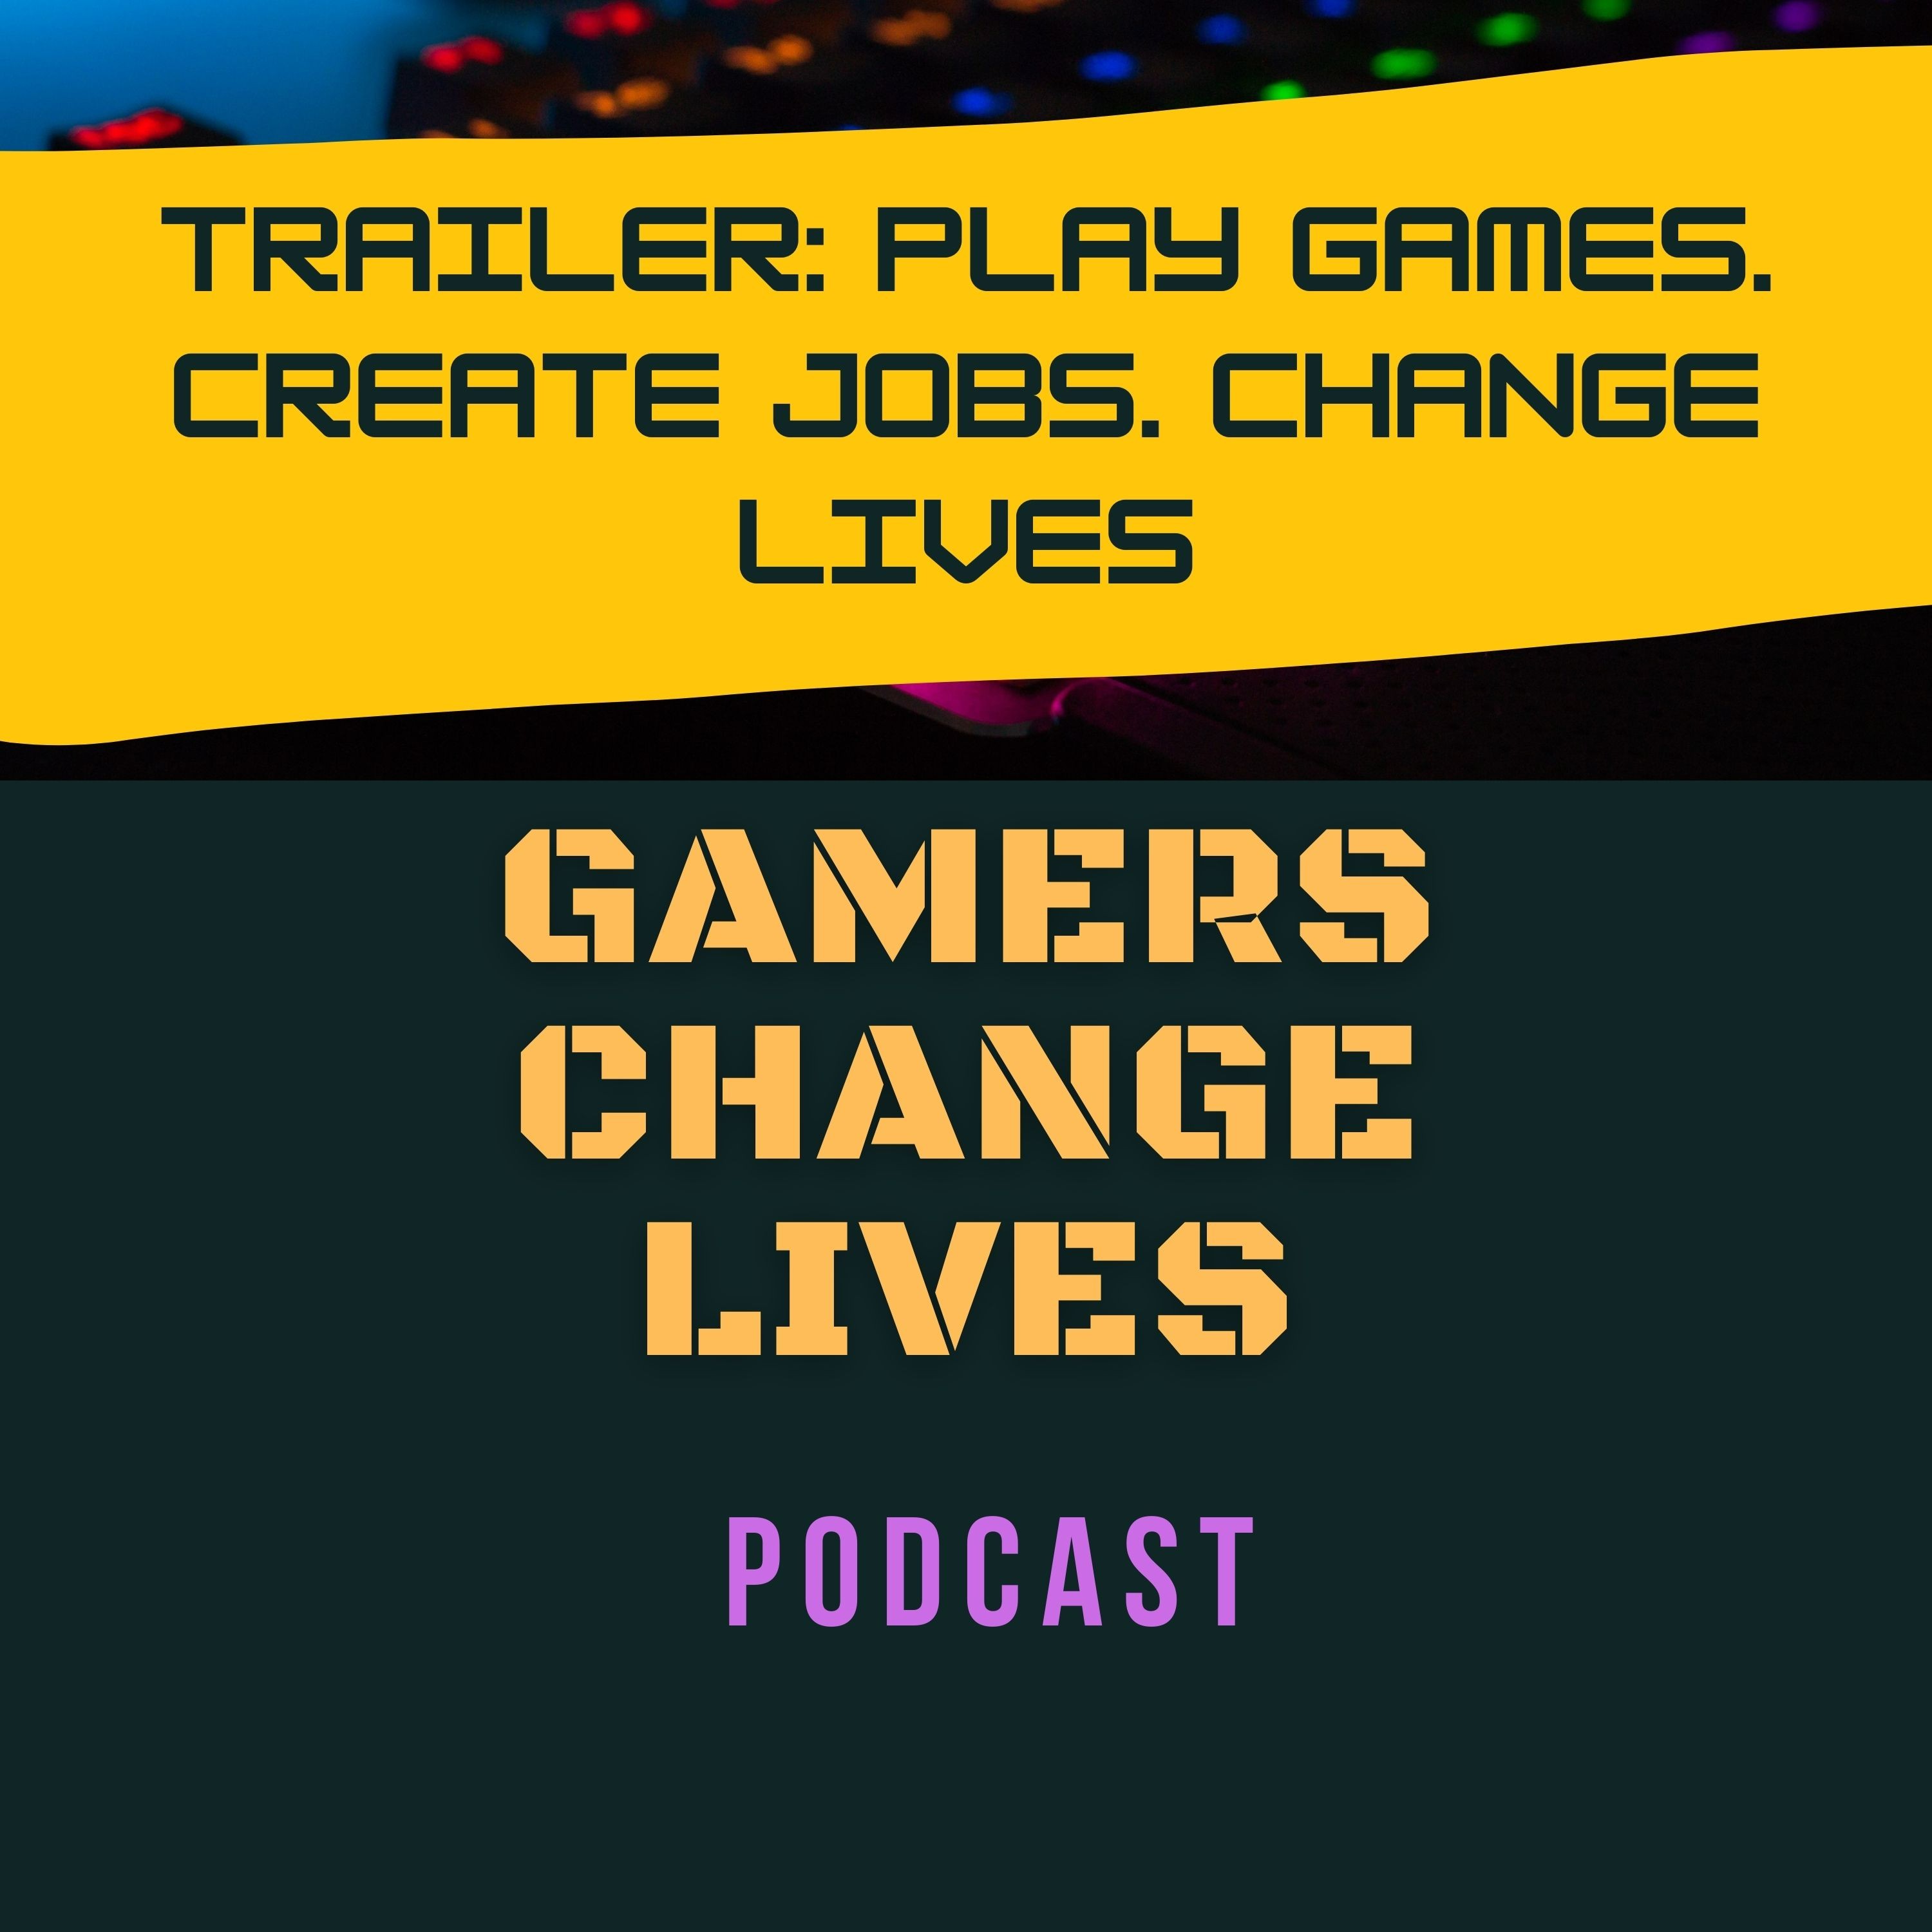 Gamers Change Lives - Play Games. Create Jobs. Change Lives.